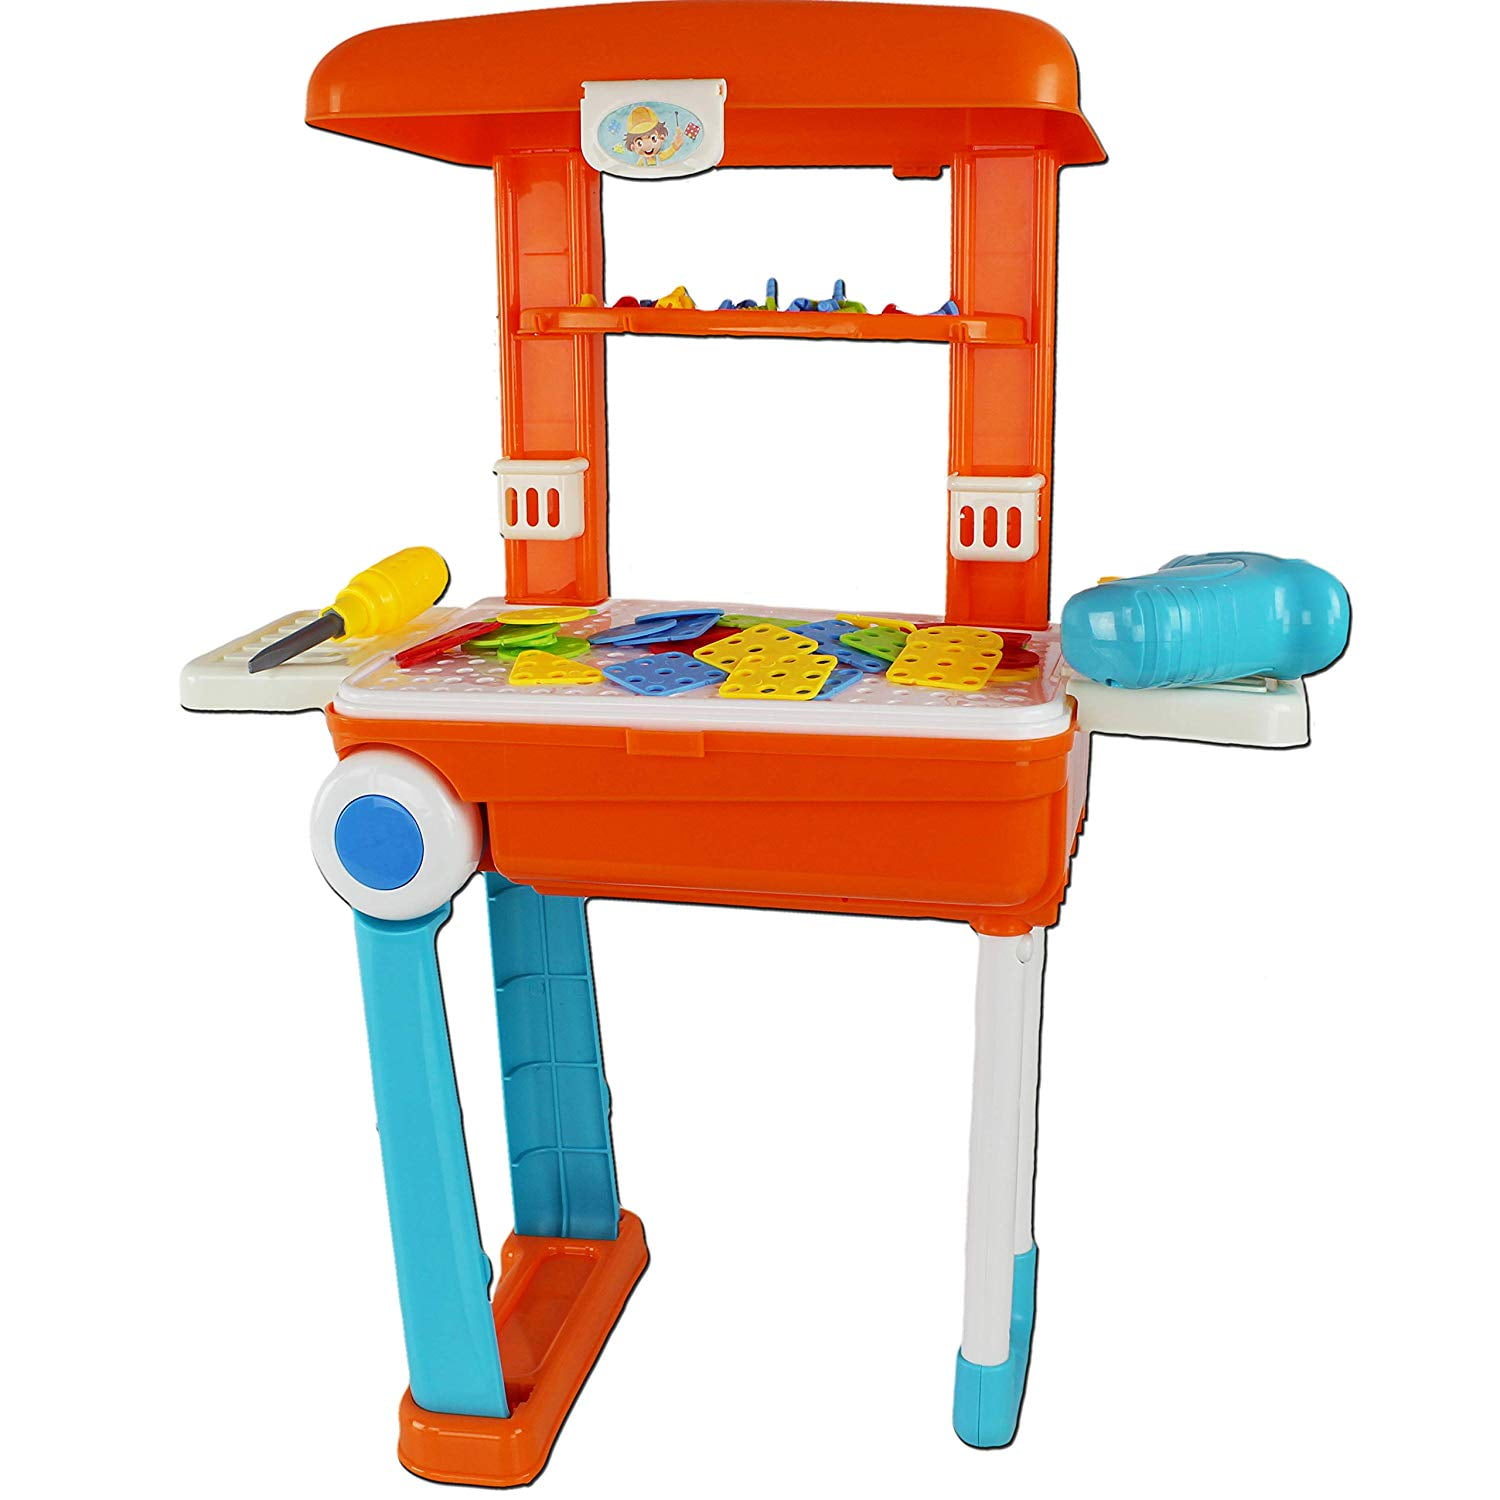 Little Moppets Doctor Play Set